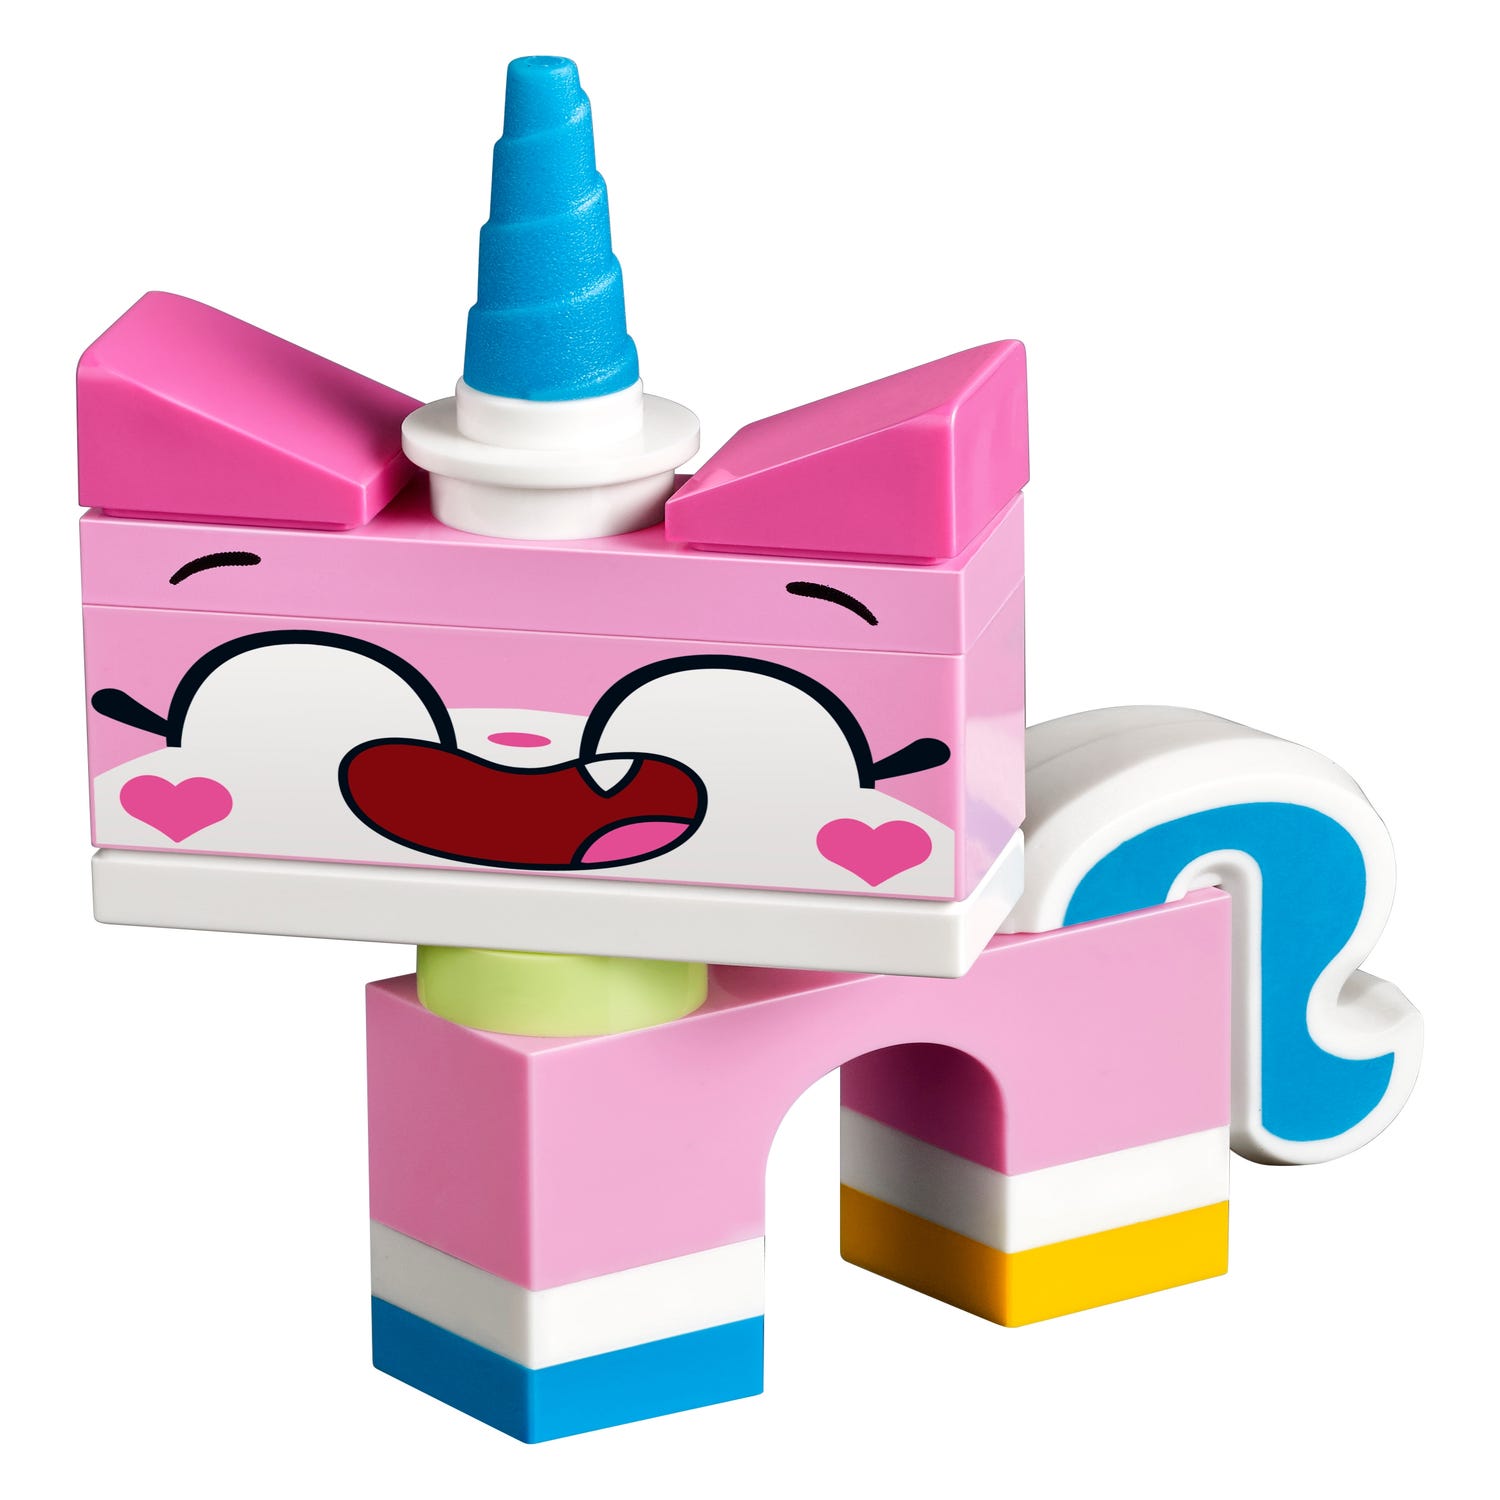 unikitty-castle-room-5005239-unikitty-buy-online-at-the-official